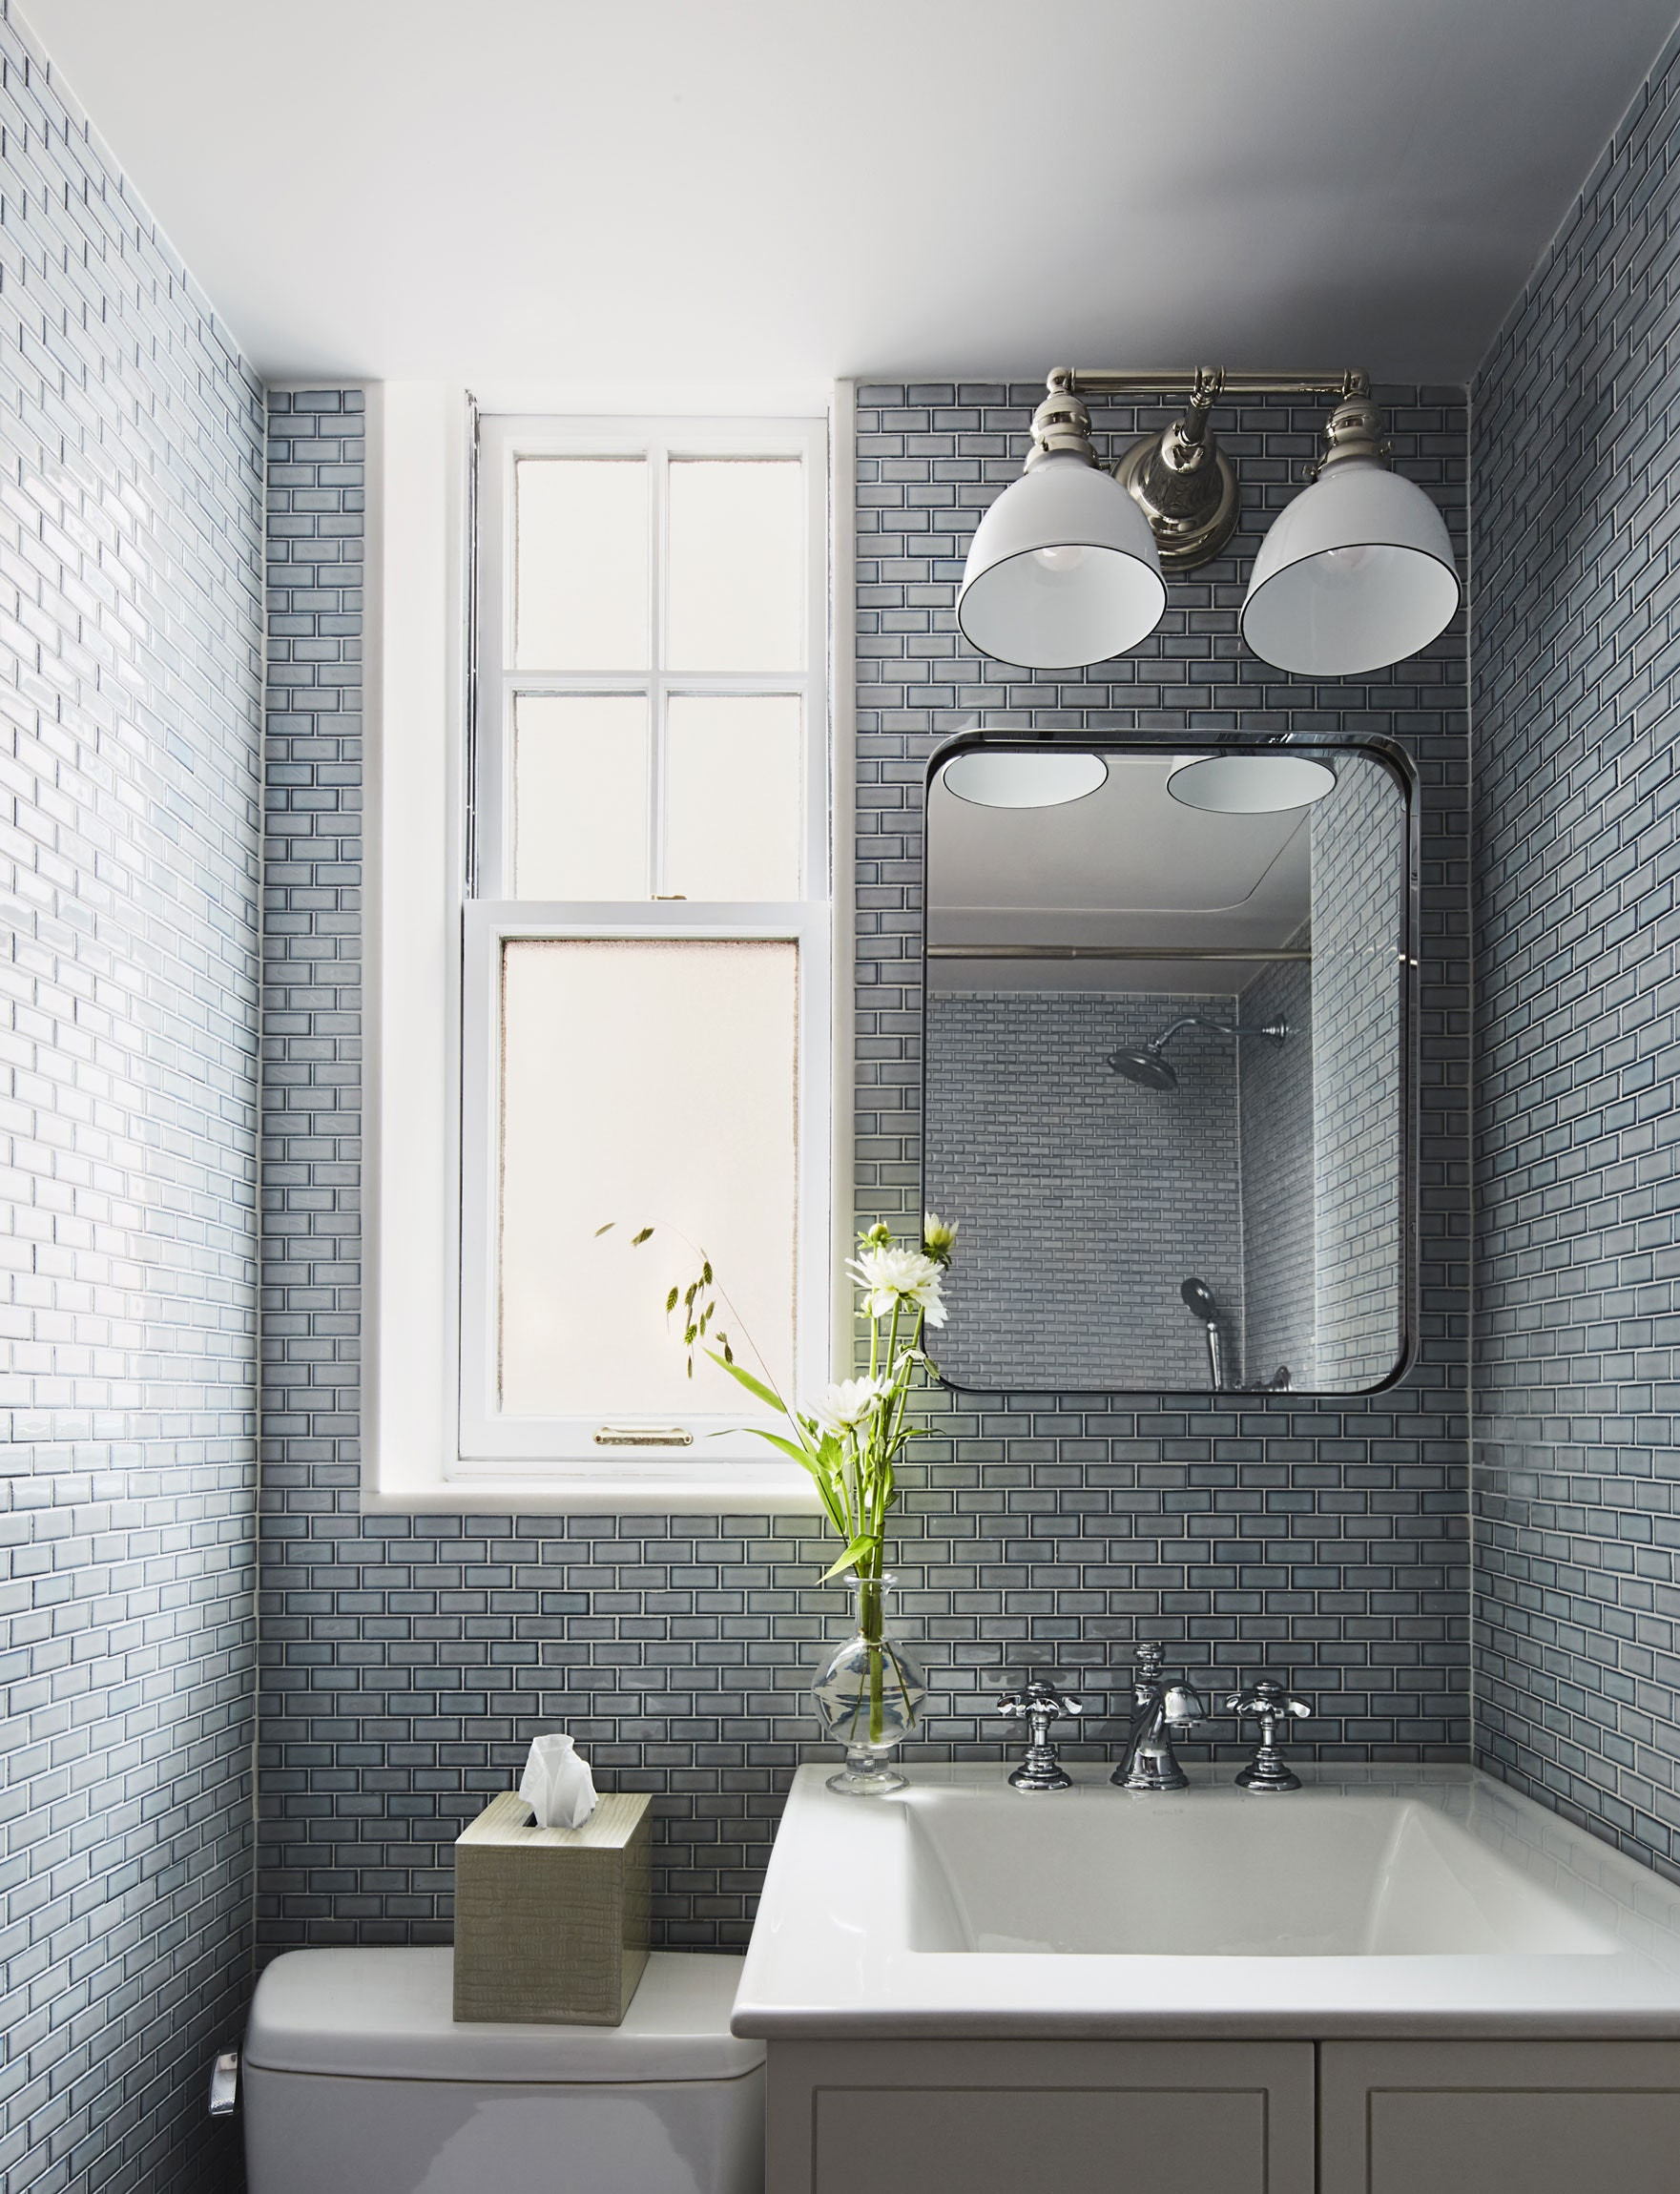 Bathroom Tile Design
 This Bathroom Tile Design Idea Changes Everything